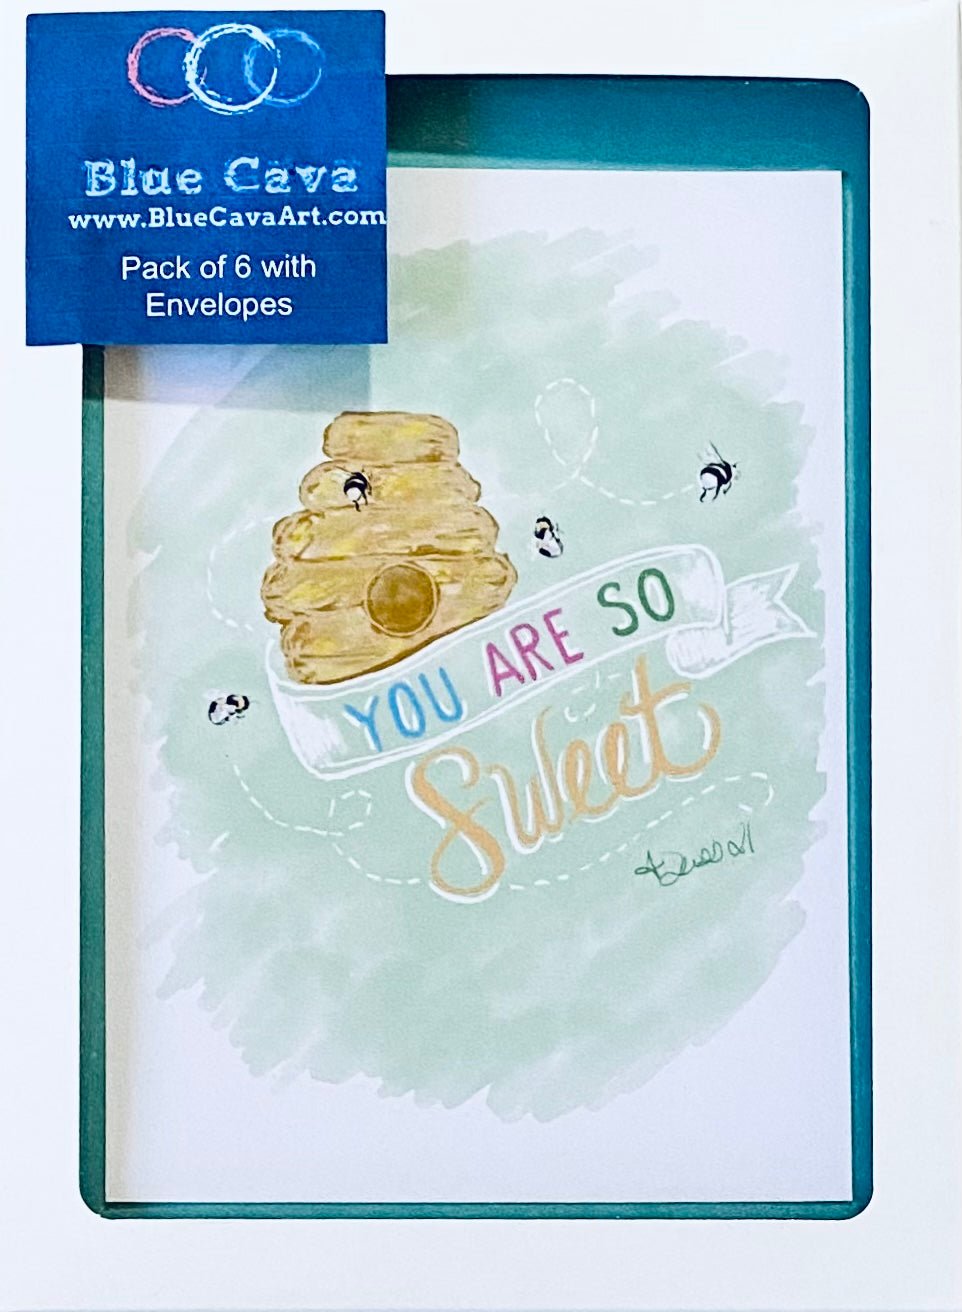 You are So Sweet Greeting card (Two colors available) - Blue Cava